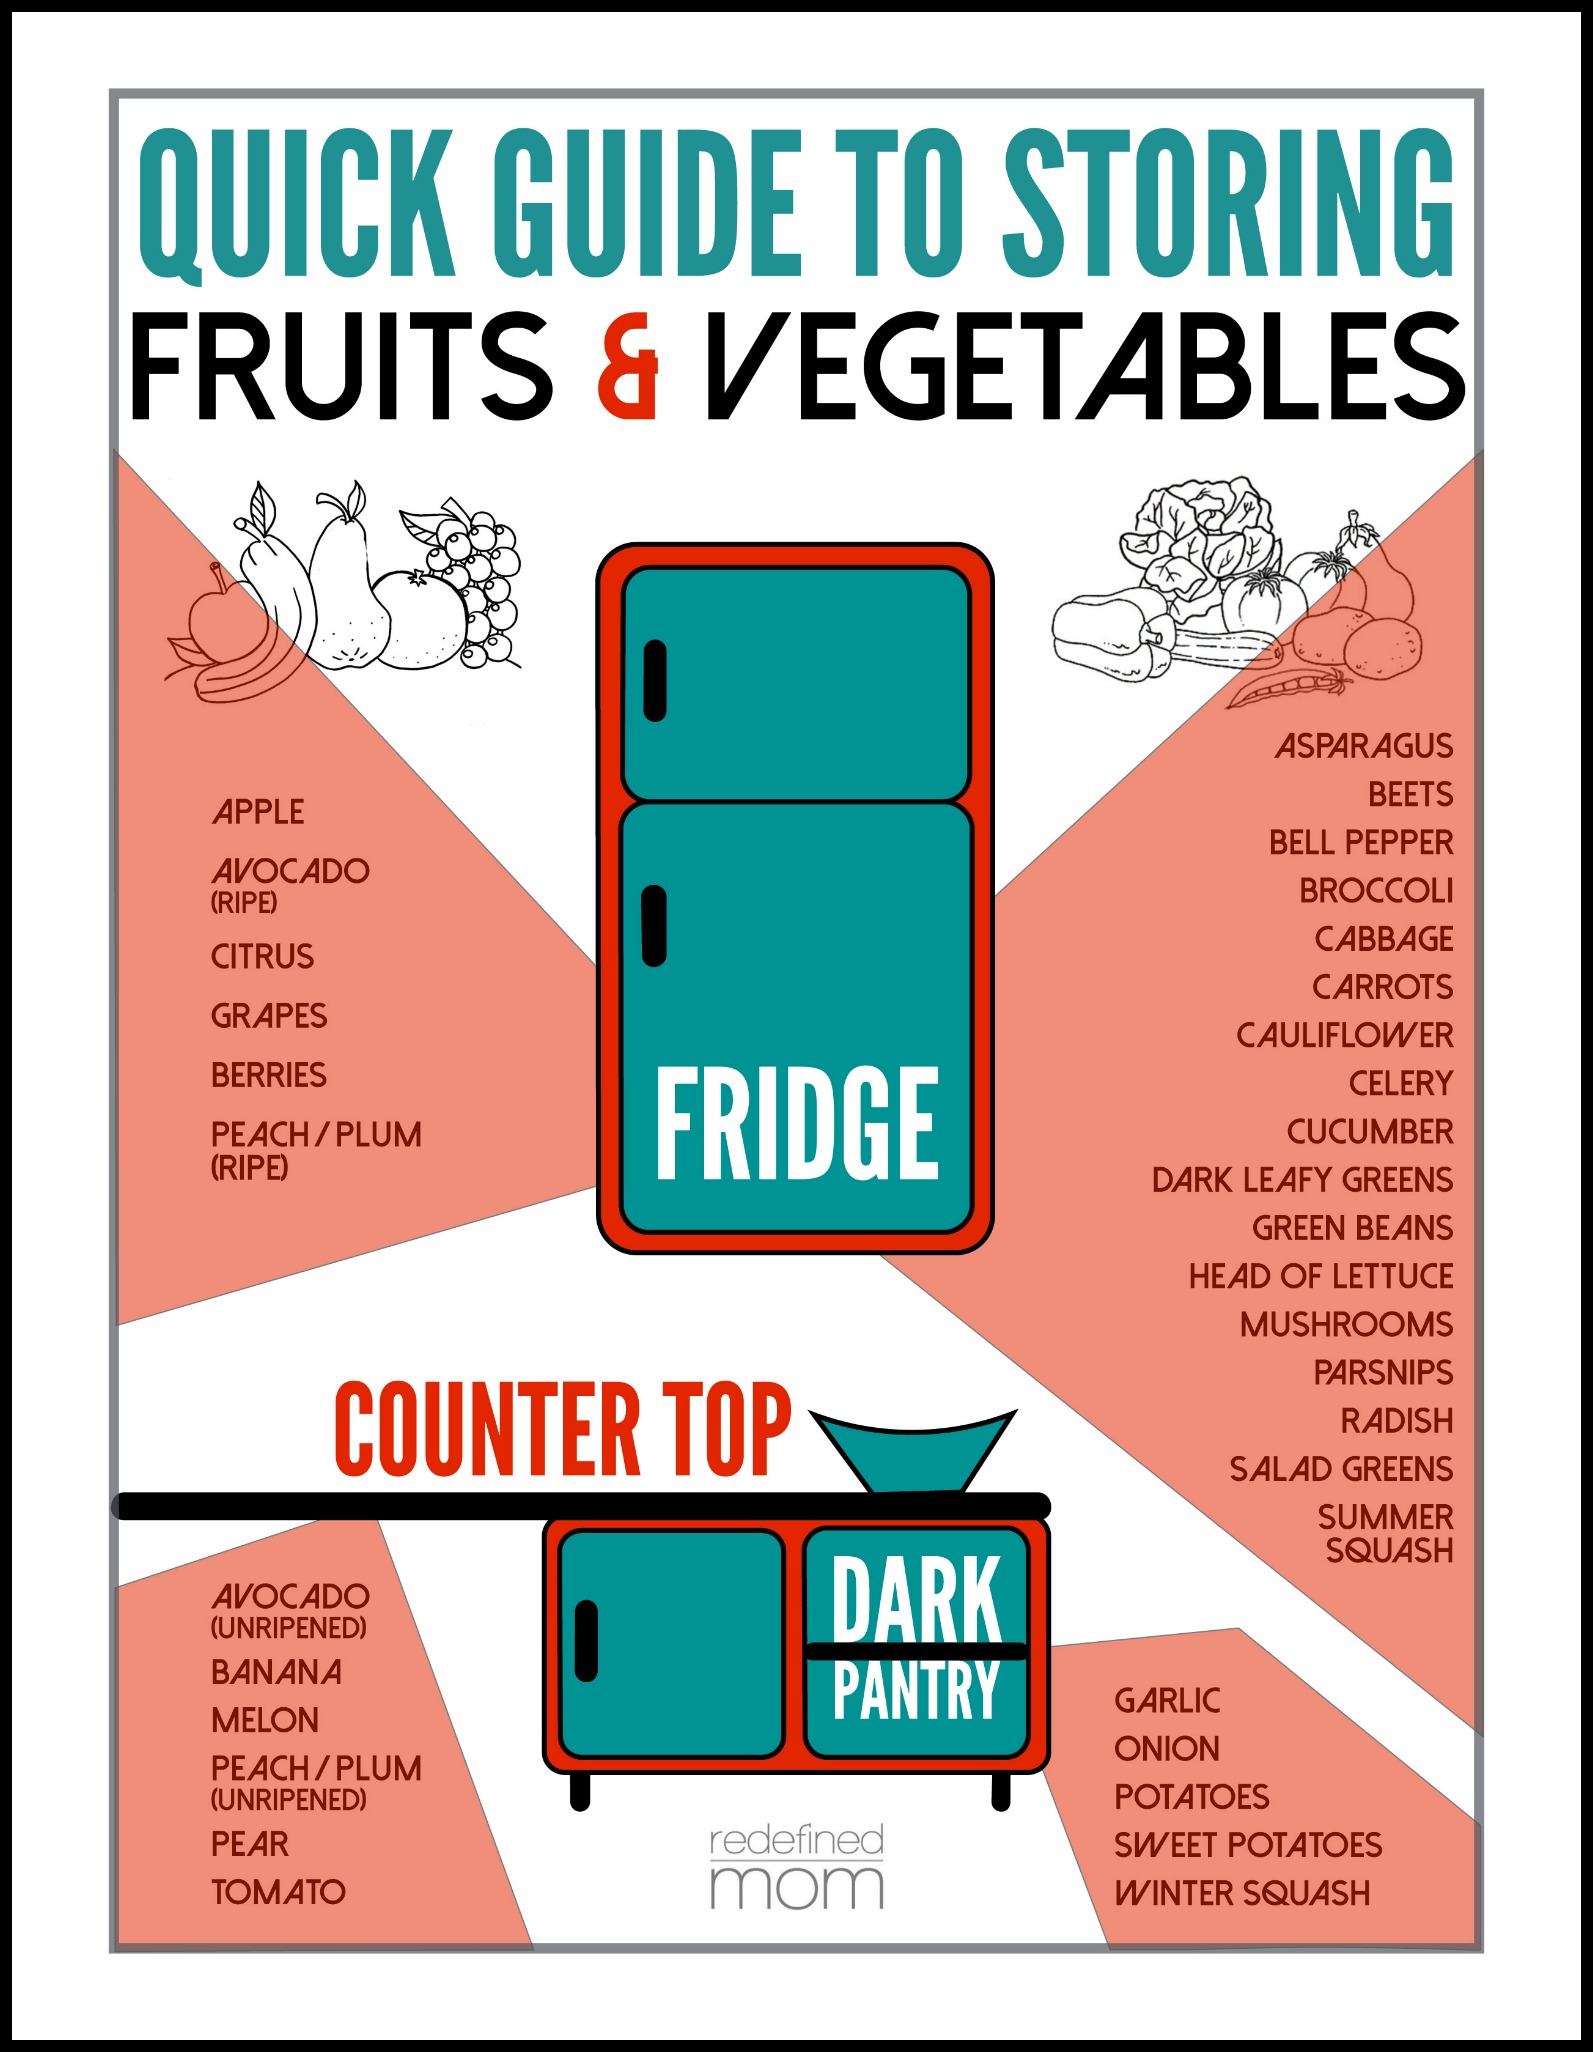 https://redefinedmom.com/wp-content/uploads/2015/07/How-to-Store-Fruits-and-Vegetables-Info-Graphic.jpg